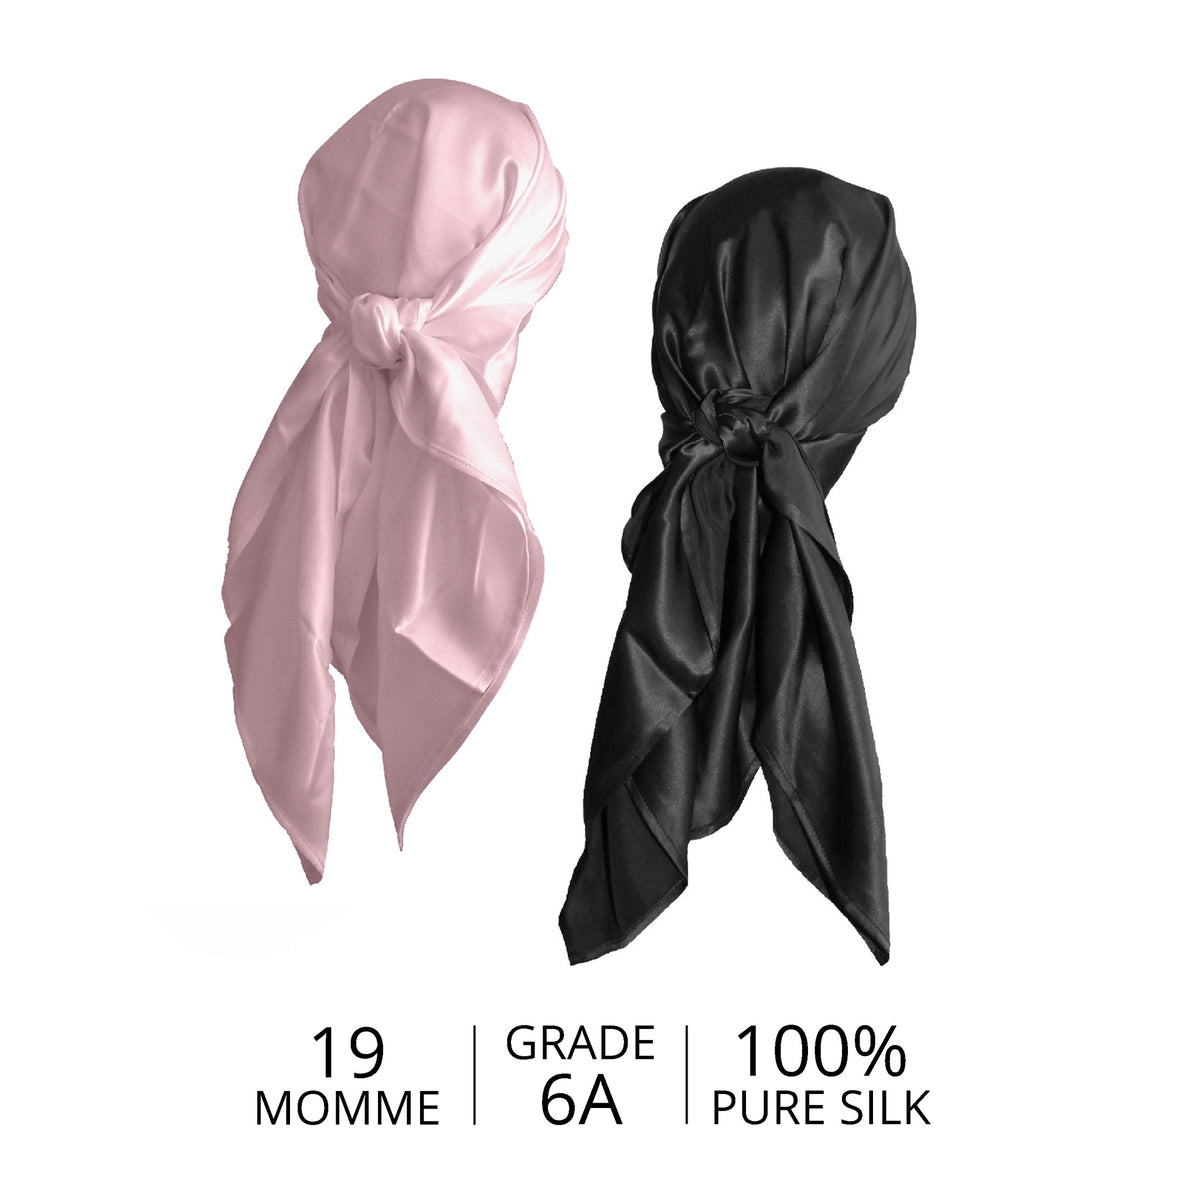  Mulberry Park Silks Silk Head Scarf Bandana Pink and Black with Details